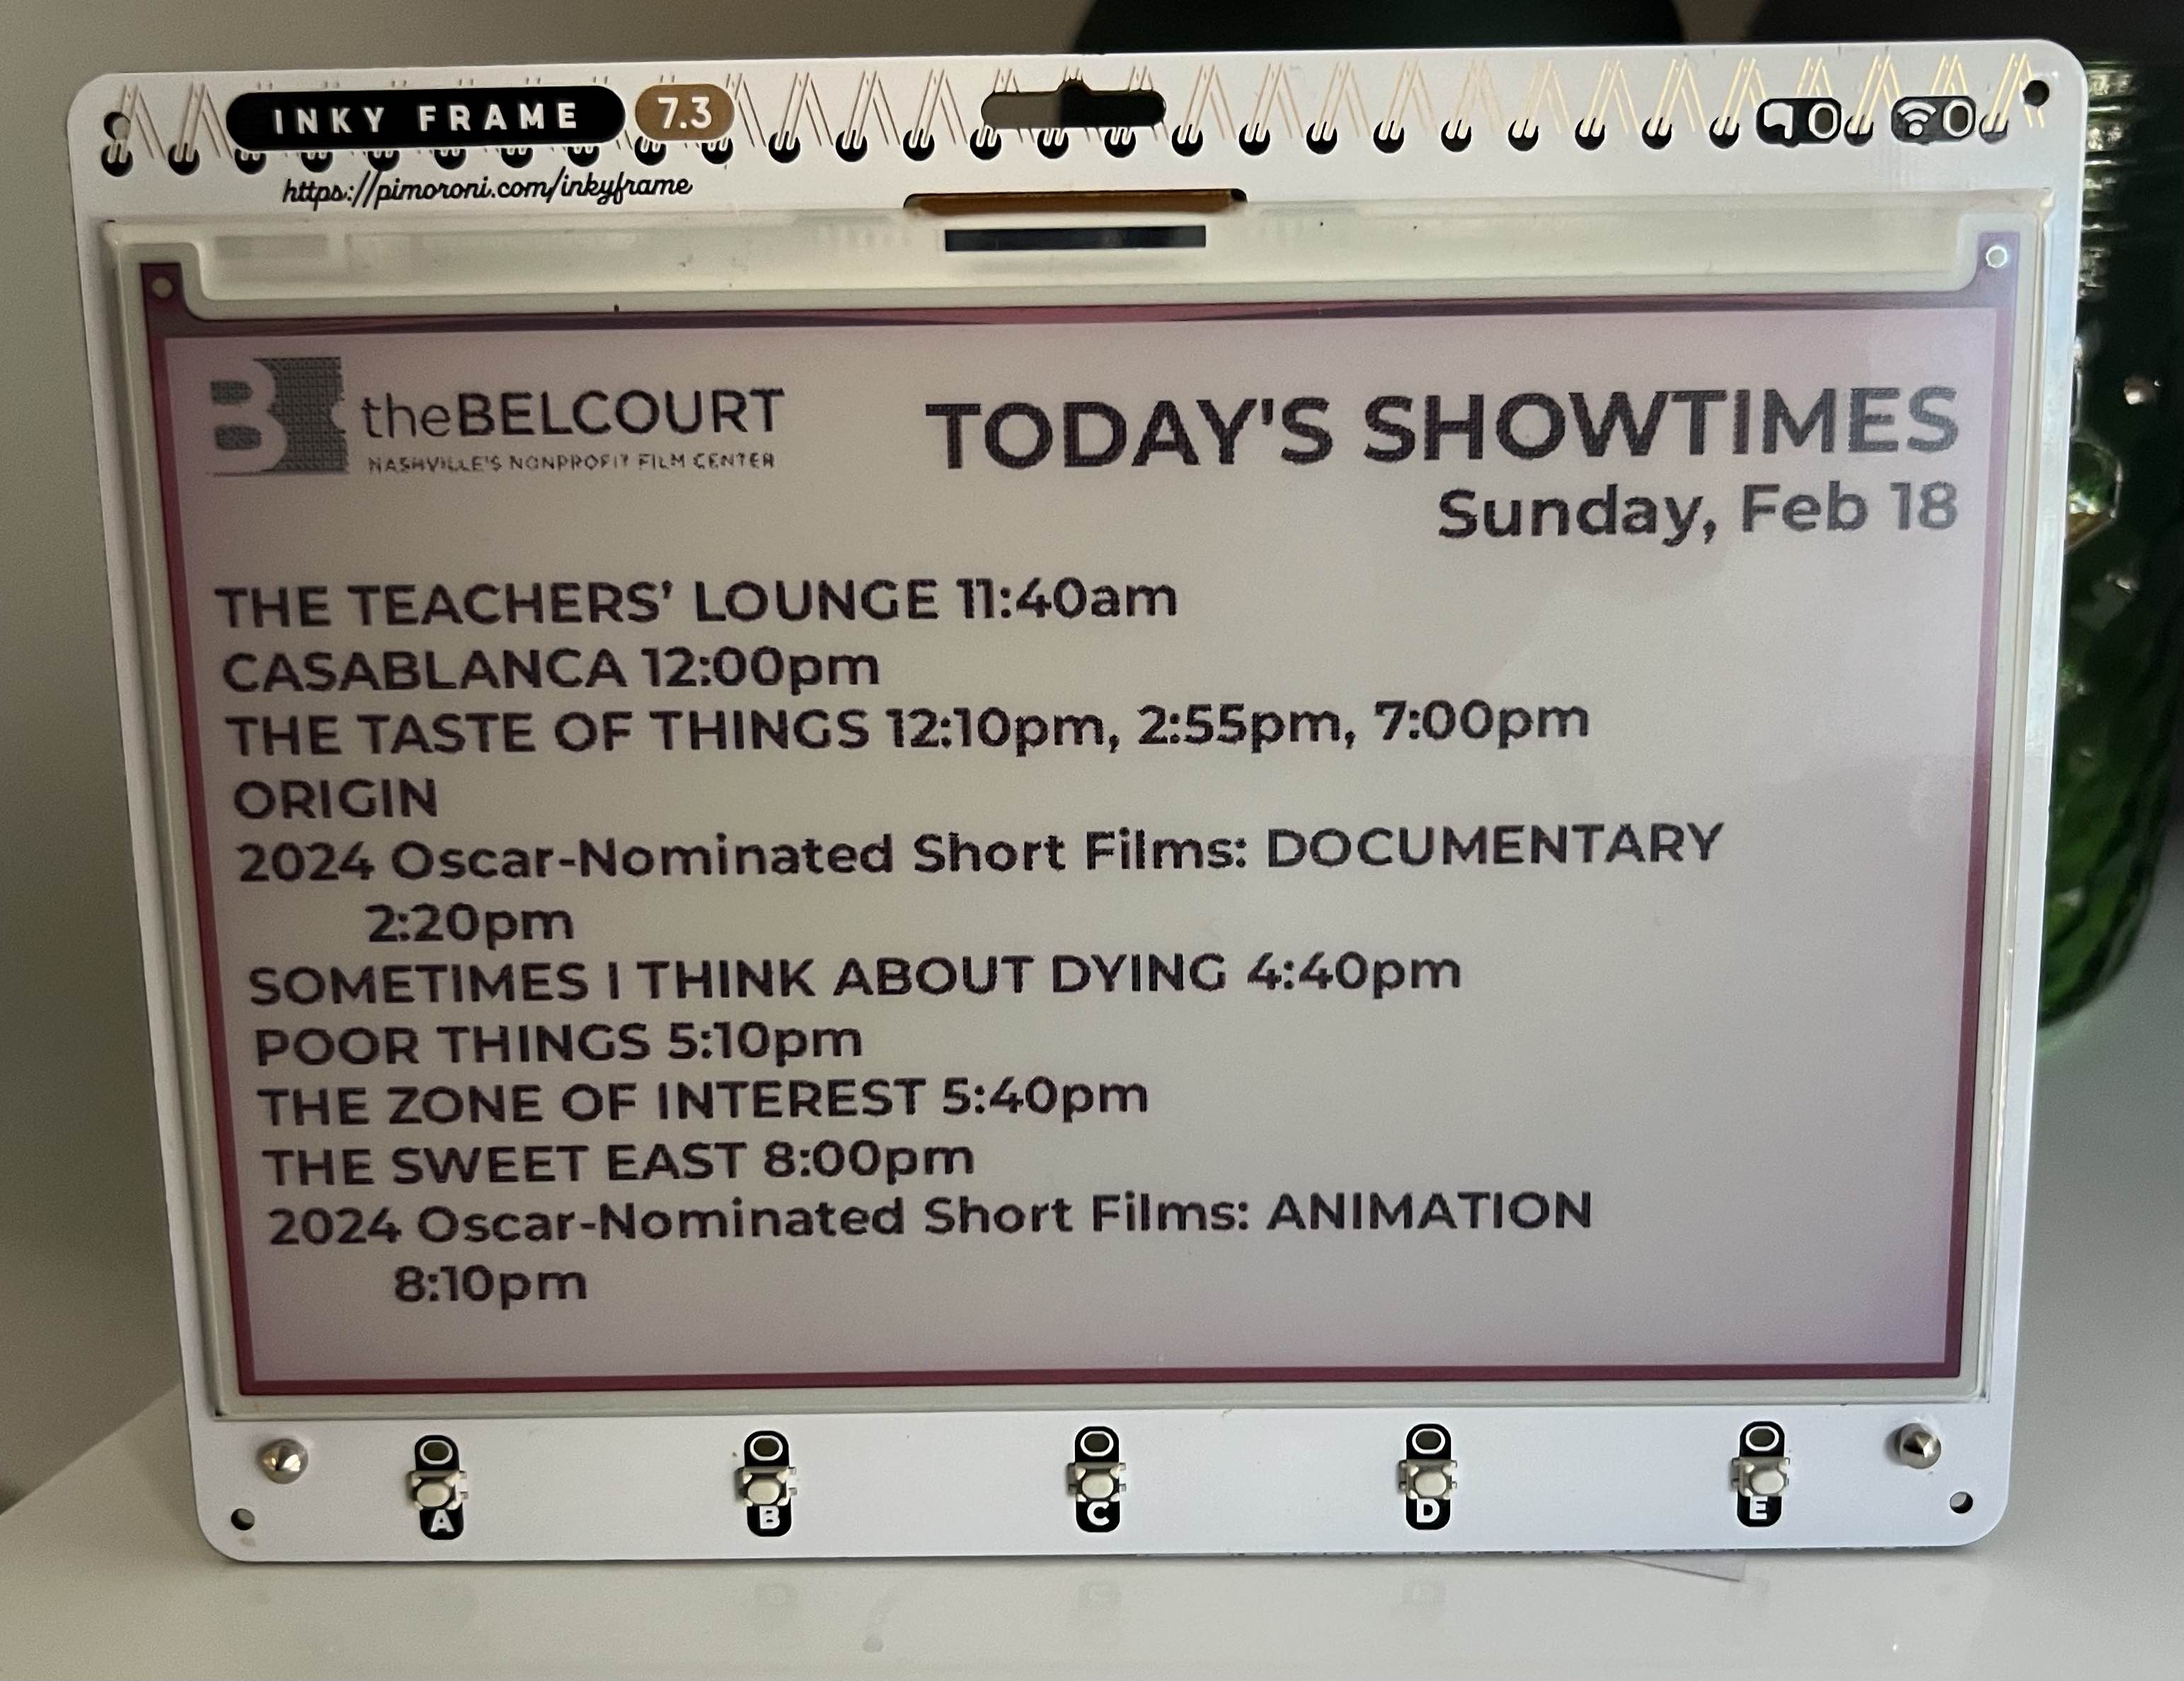 Inky Frame 7.3&quot; e-ink display with Belcourt Theatre showtimes